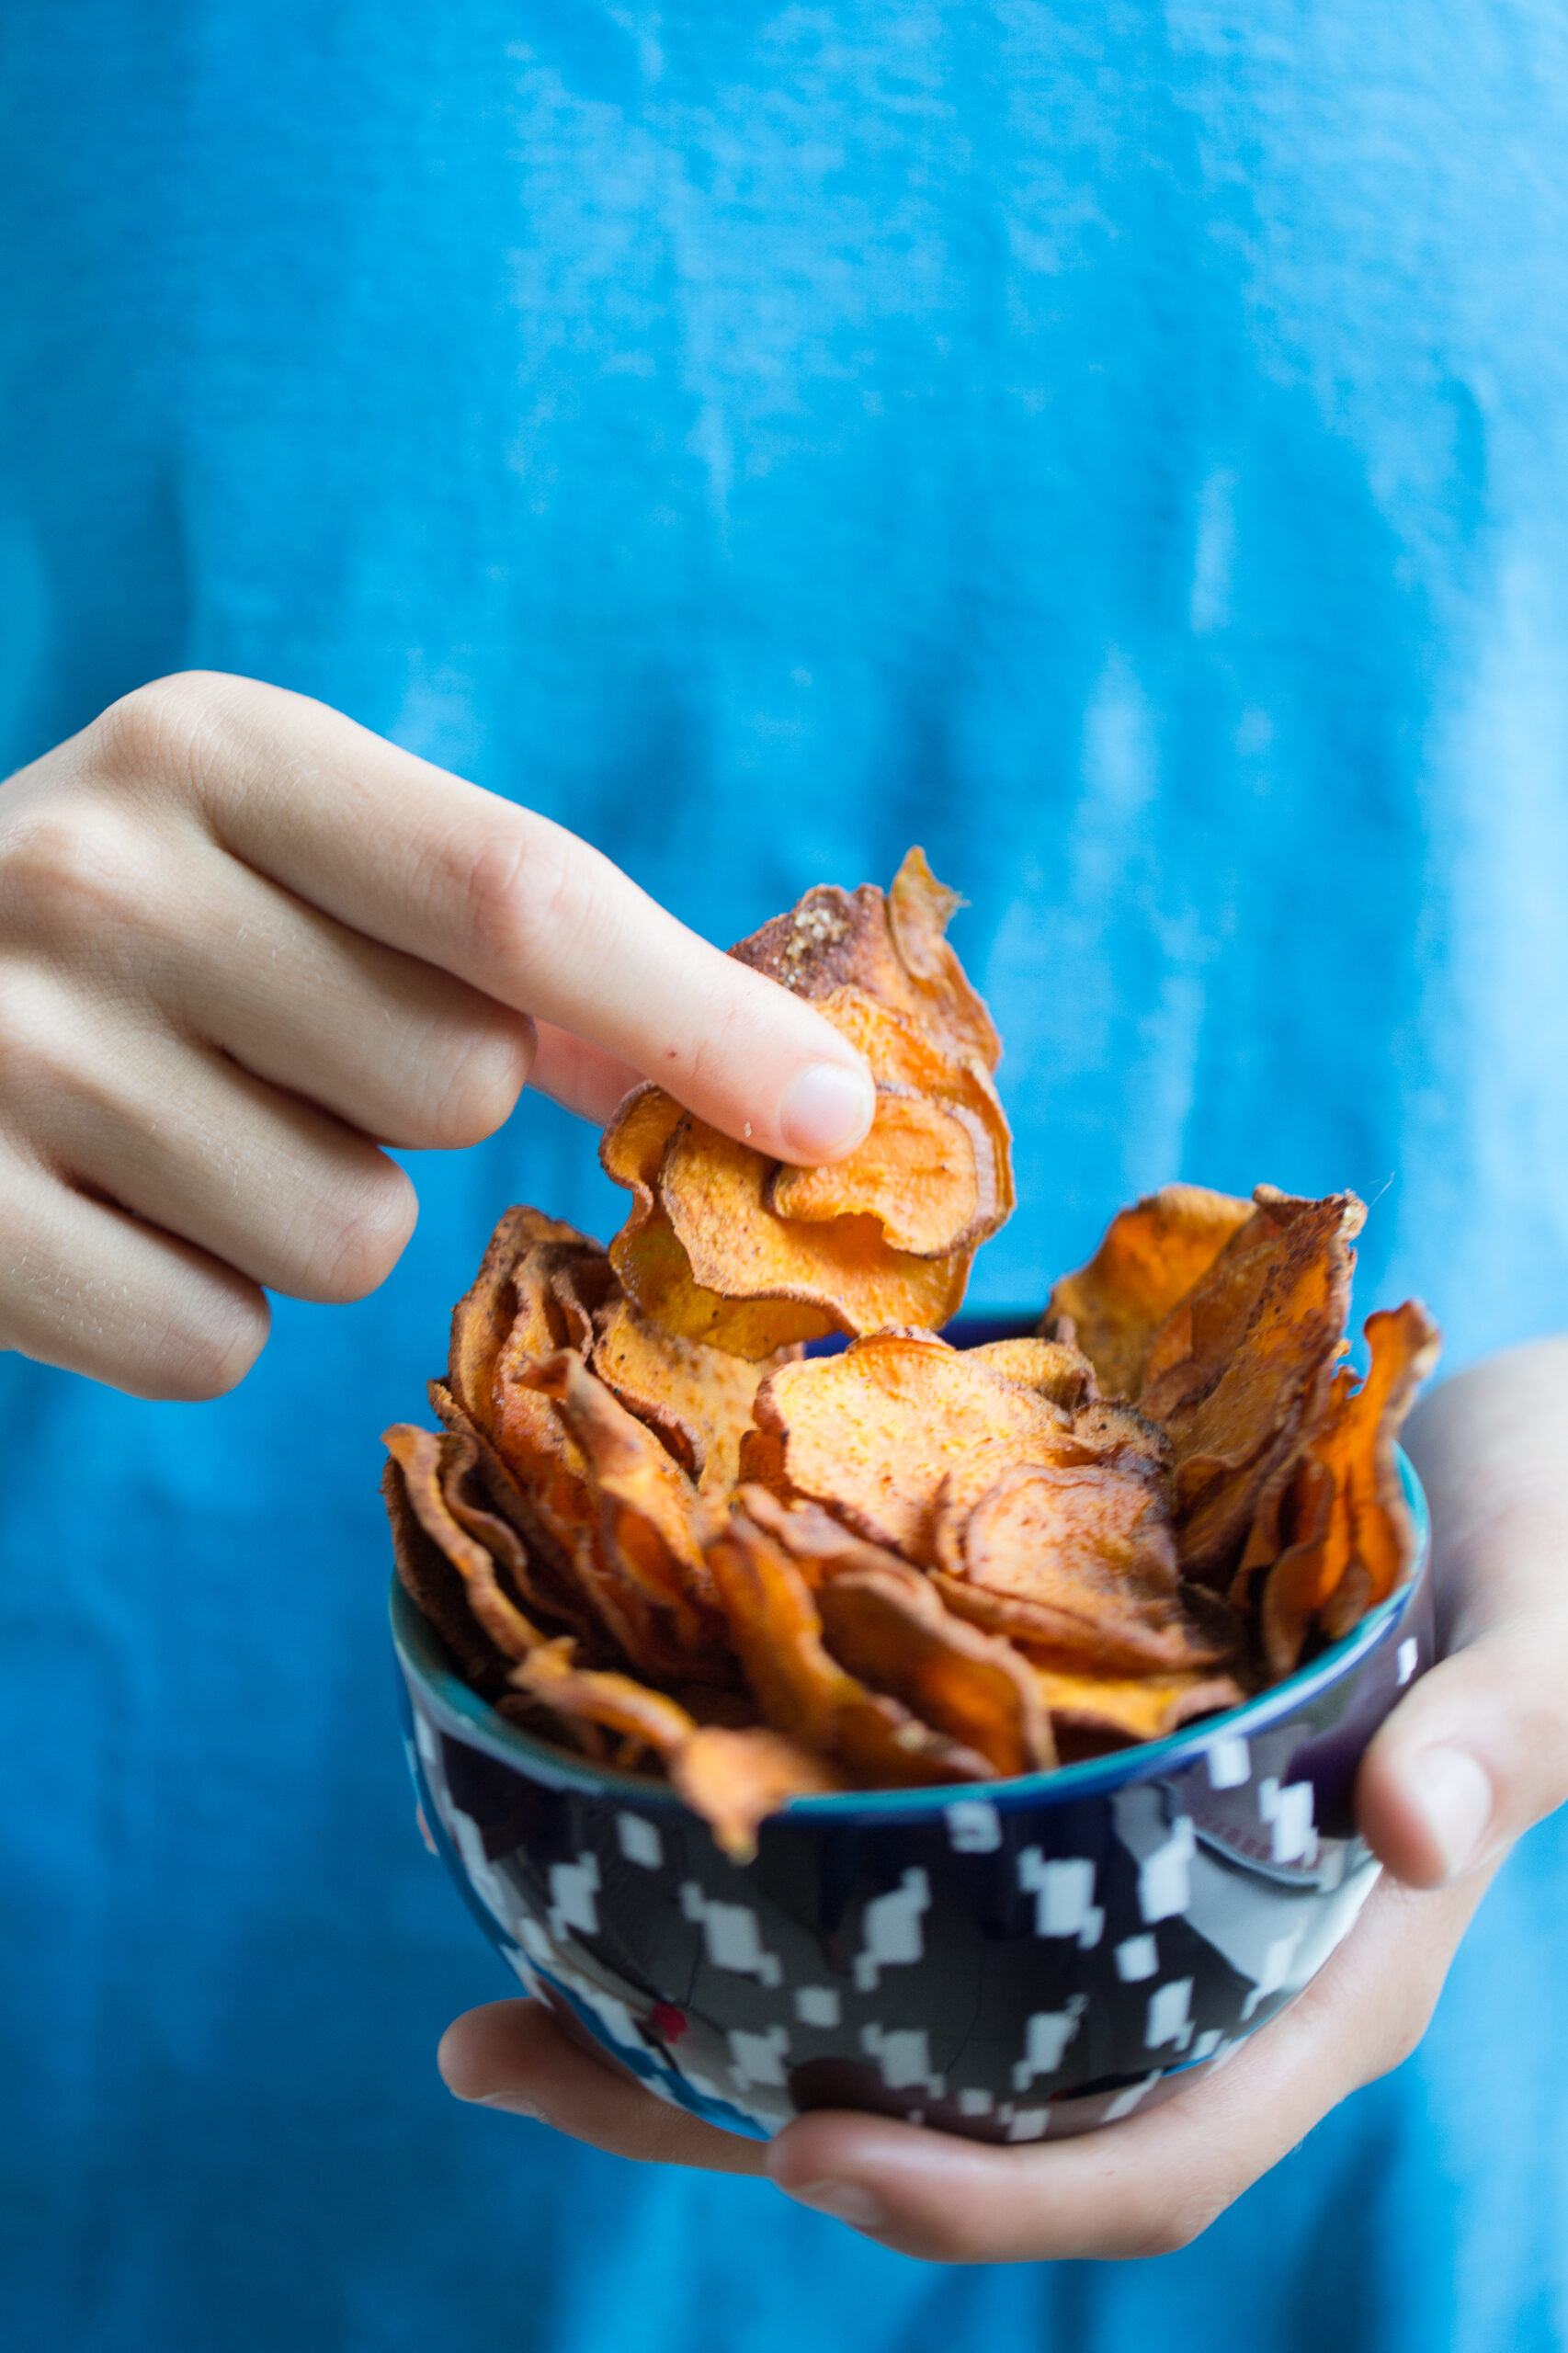 My kid grabbing healthy sweet potato chips from a blue bowl.